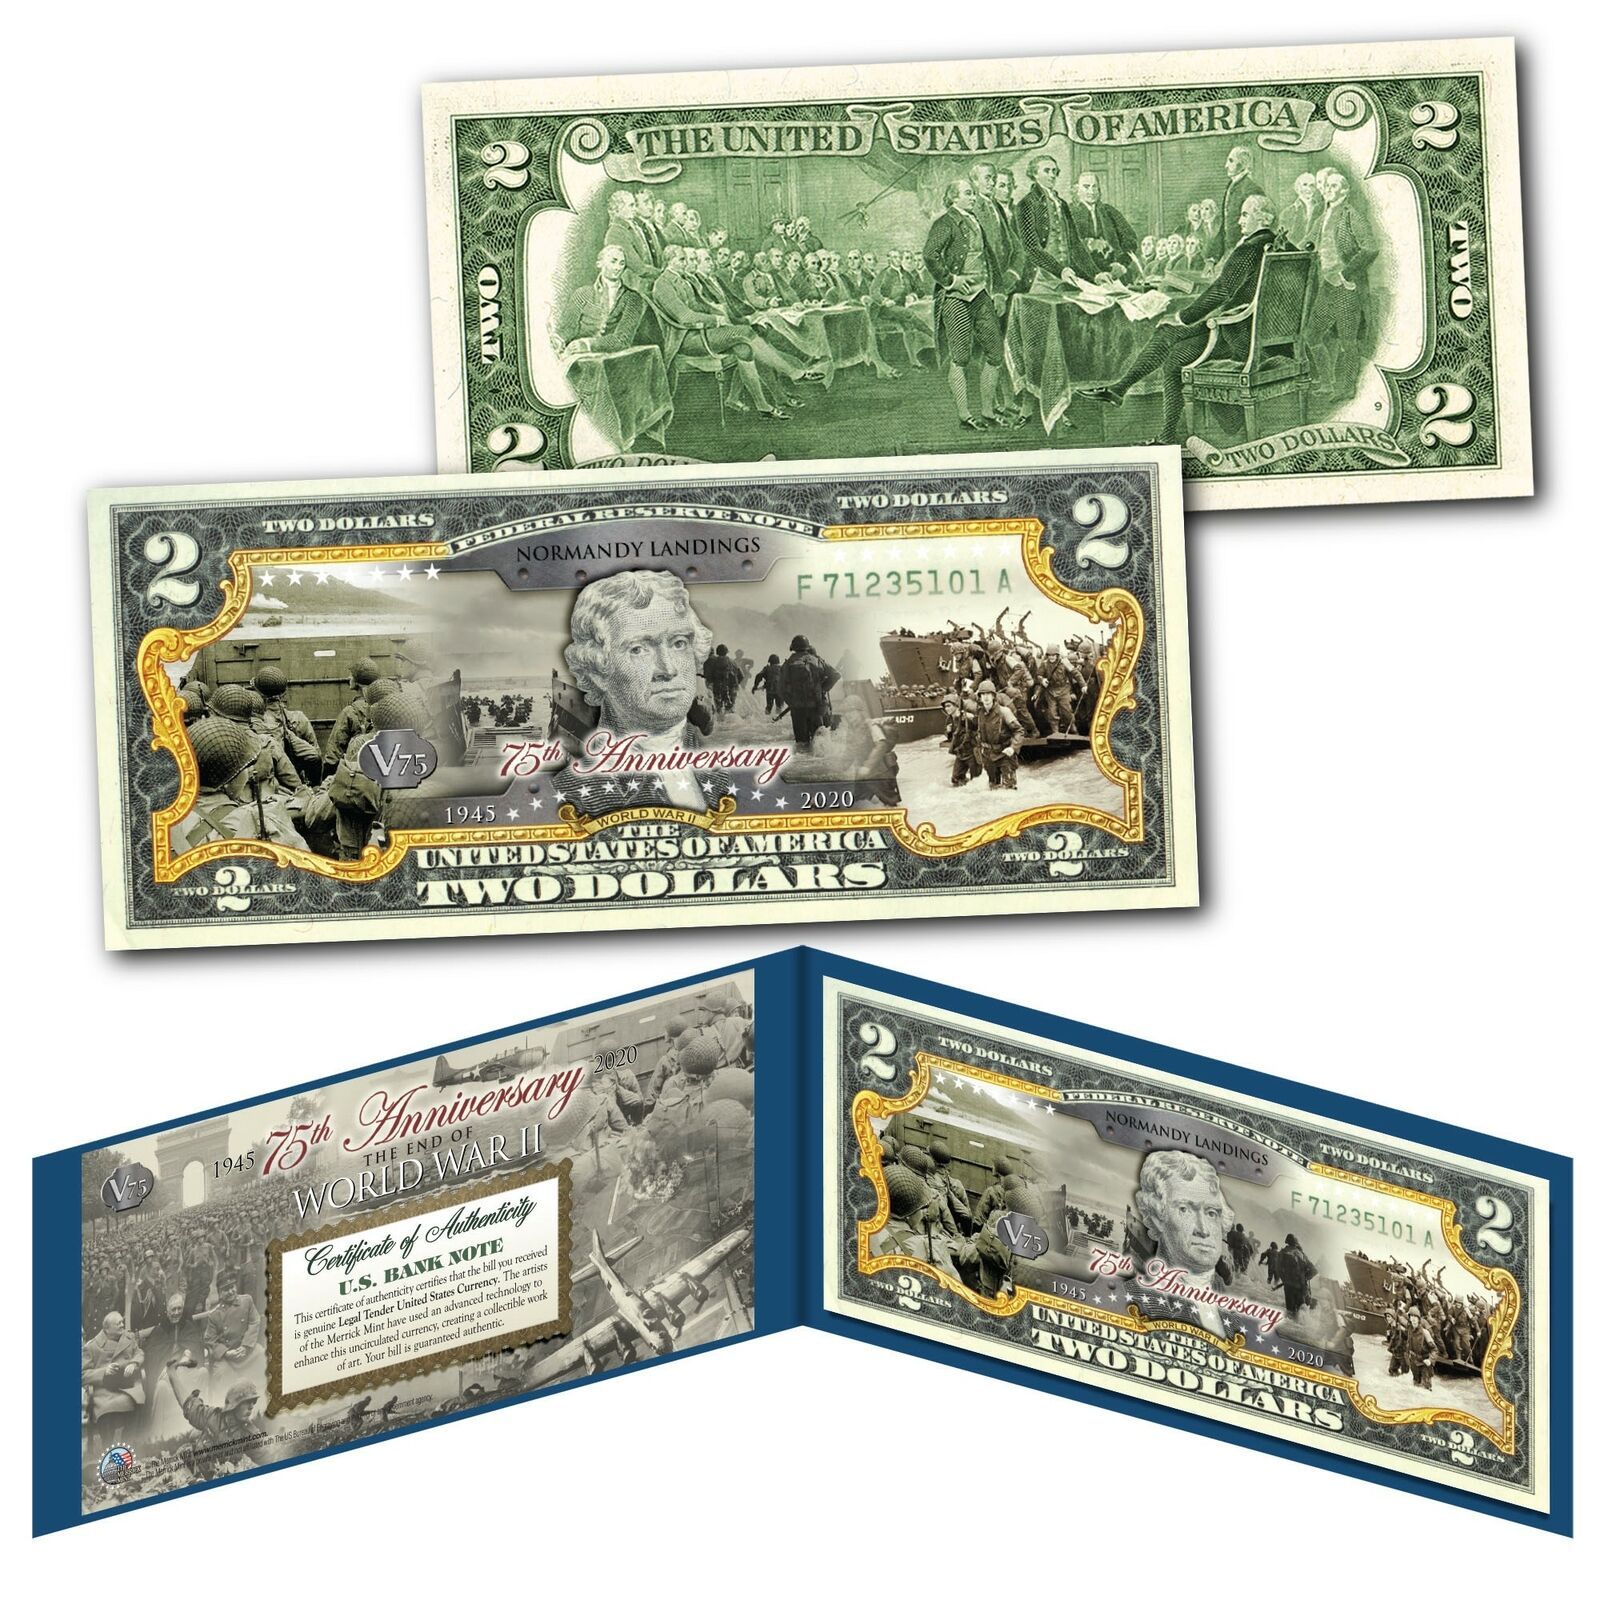 NORMANDY LANDINGS - End of WWII 75th Anniversary V75 - Authentic $2 U.S. Bill - $13.98